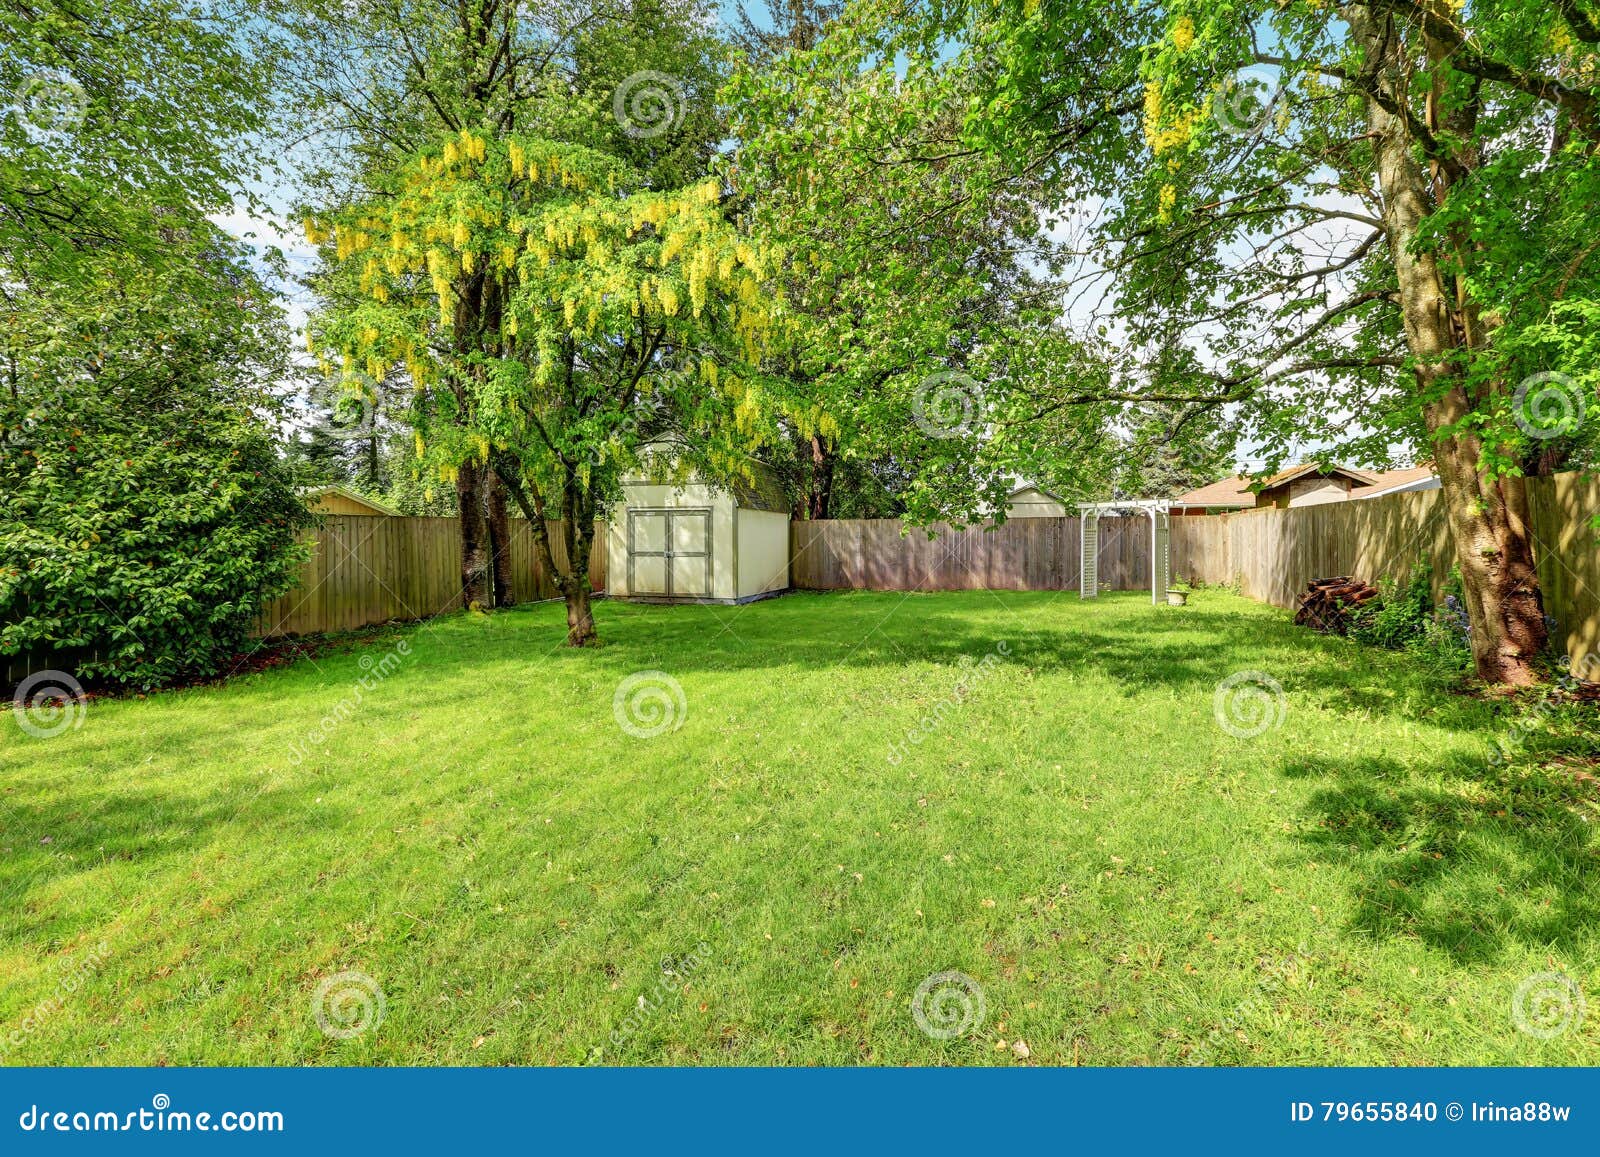 green grass and a shed in empty fenced back yard